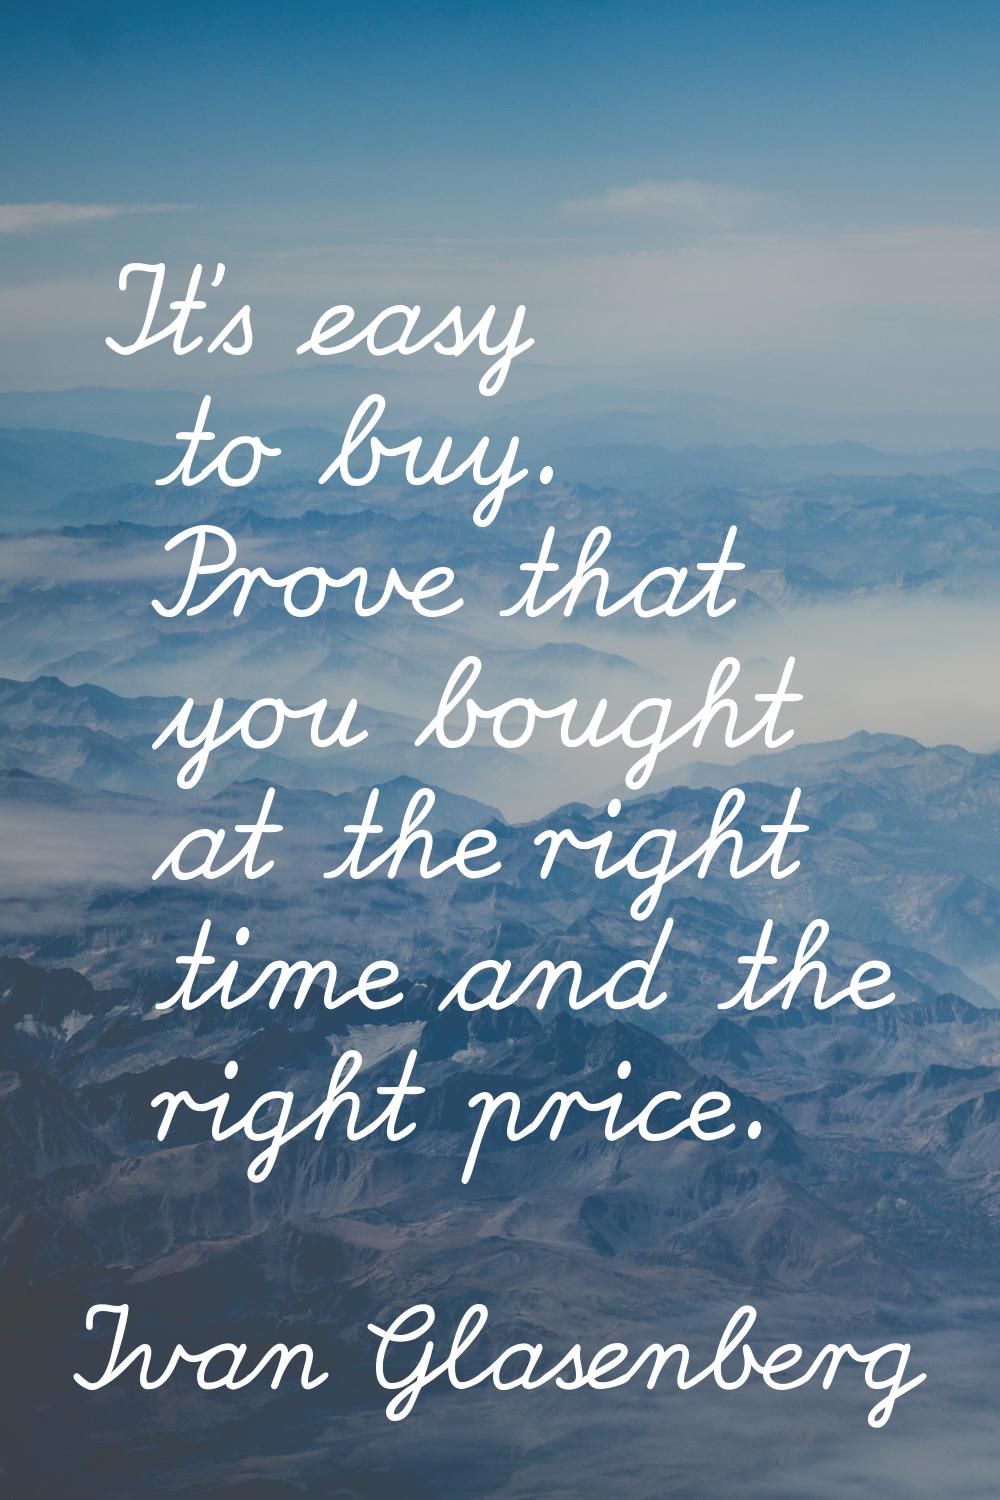 It's easy to buy. Prove that you bought at the right time and the right price.